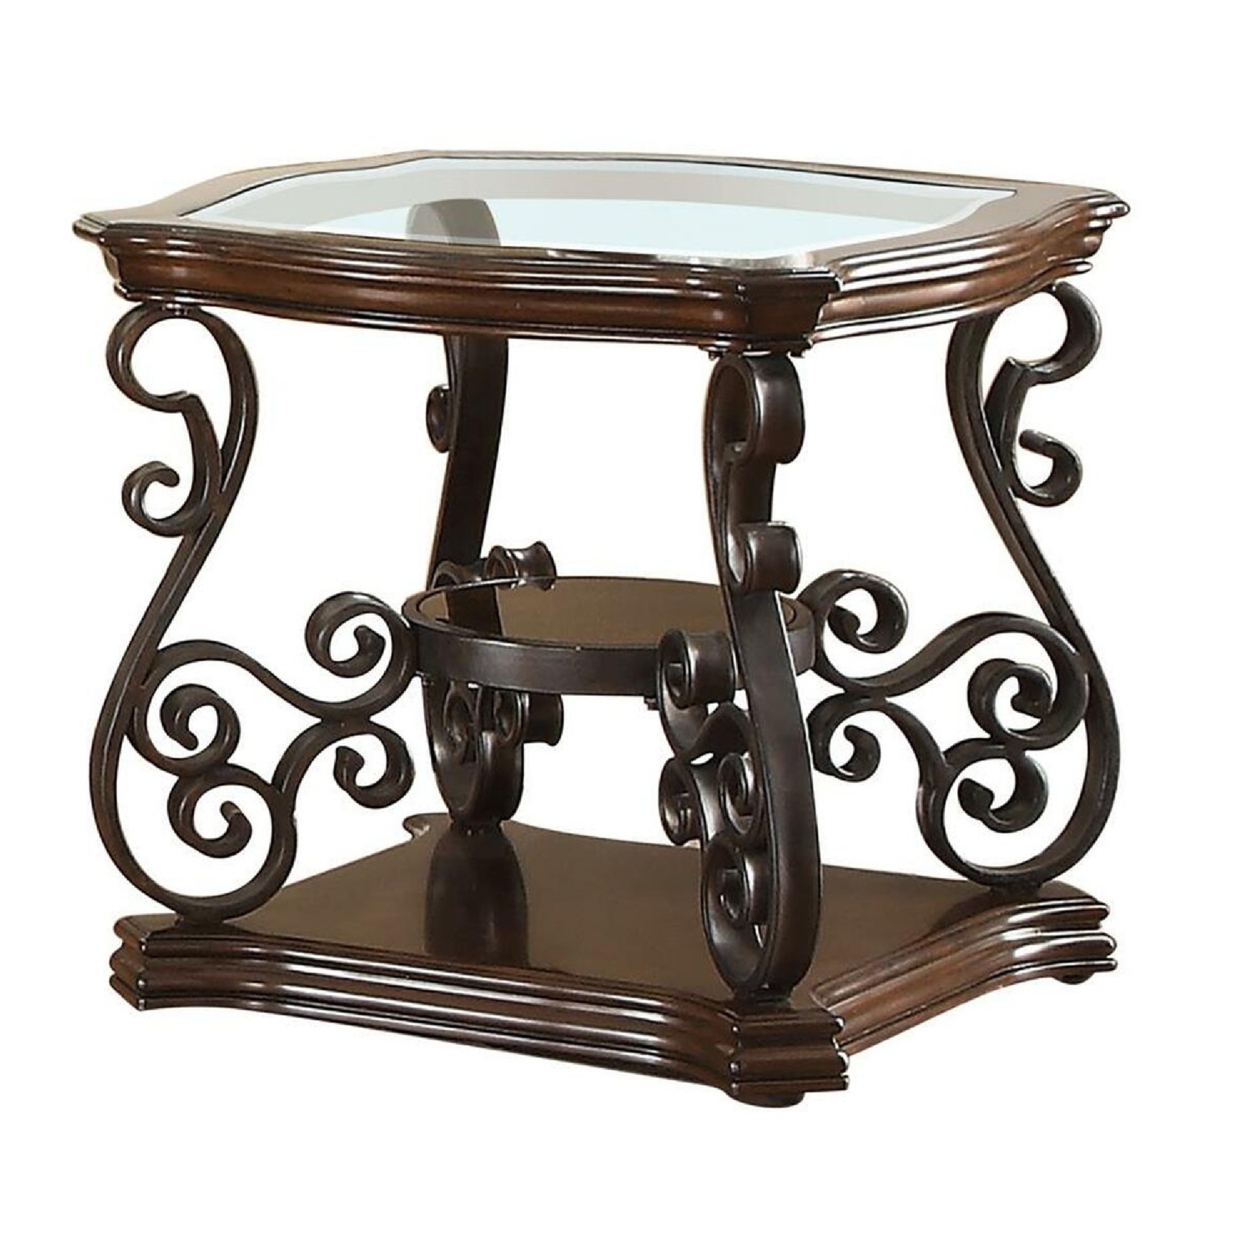 Traditional Solid End Table With Glass Inset, Metal Scrolls & 2 Shelves, Brown- Saltoro Sherpi